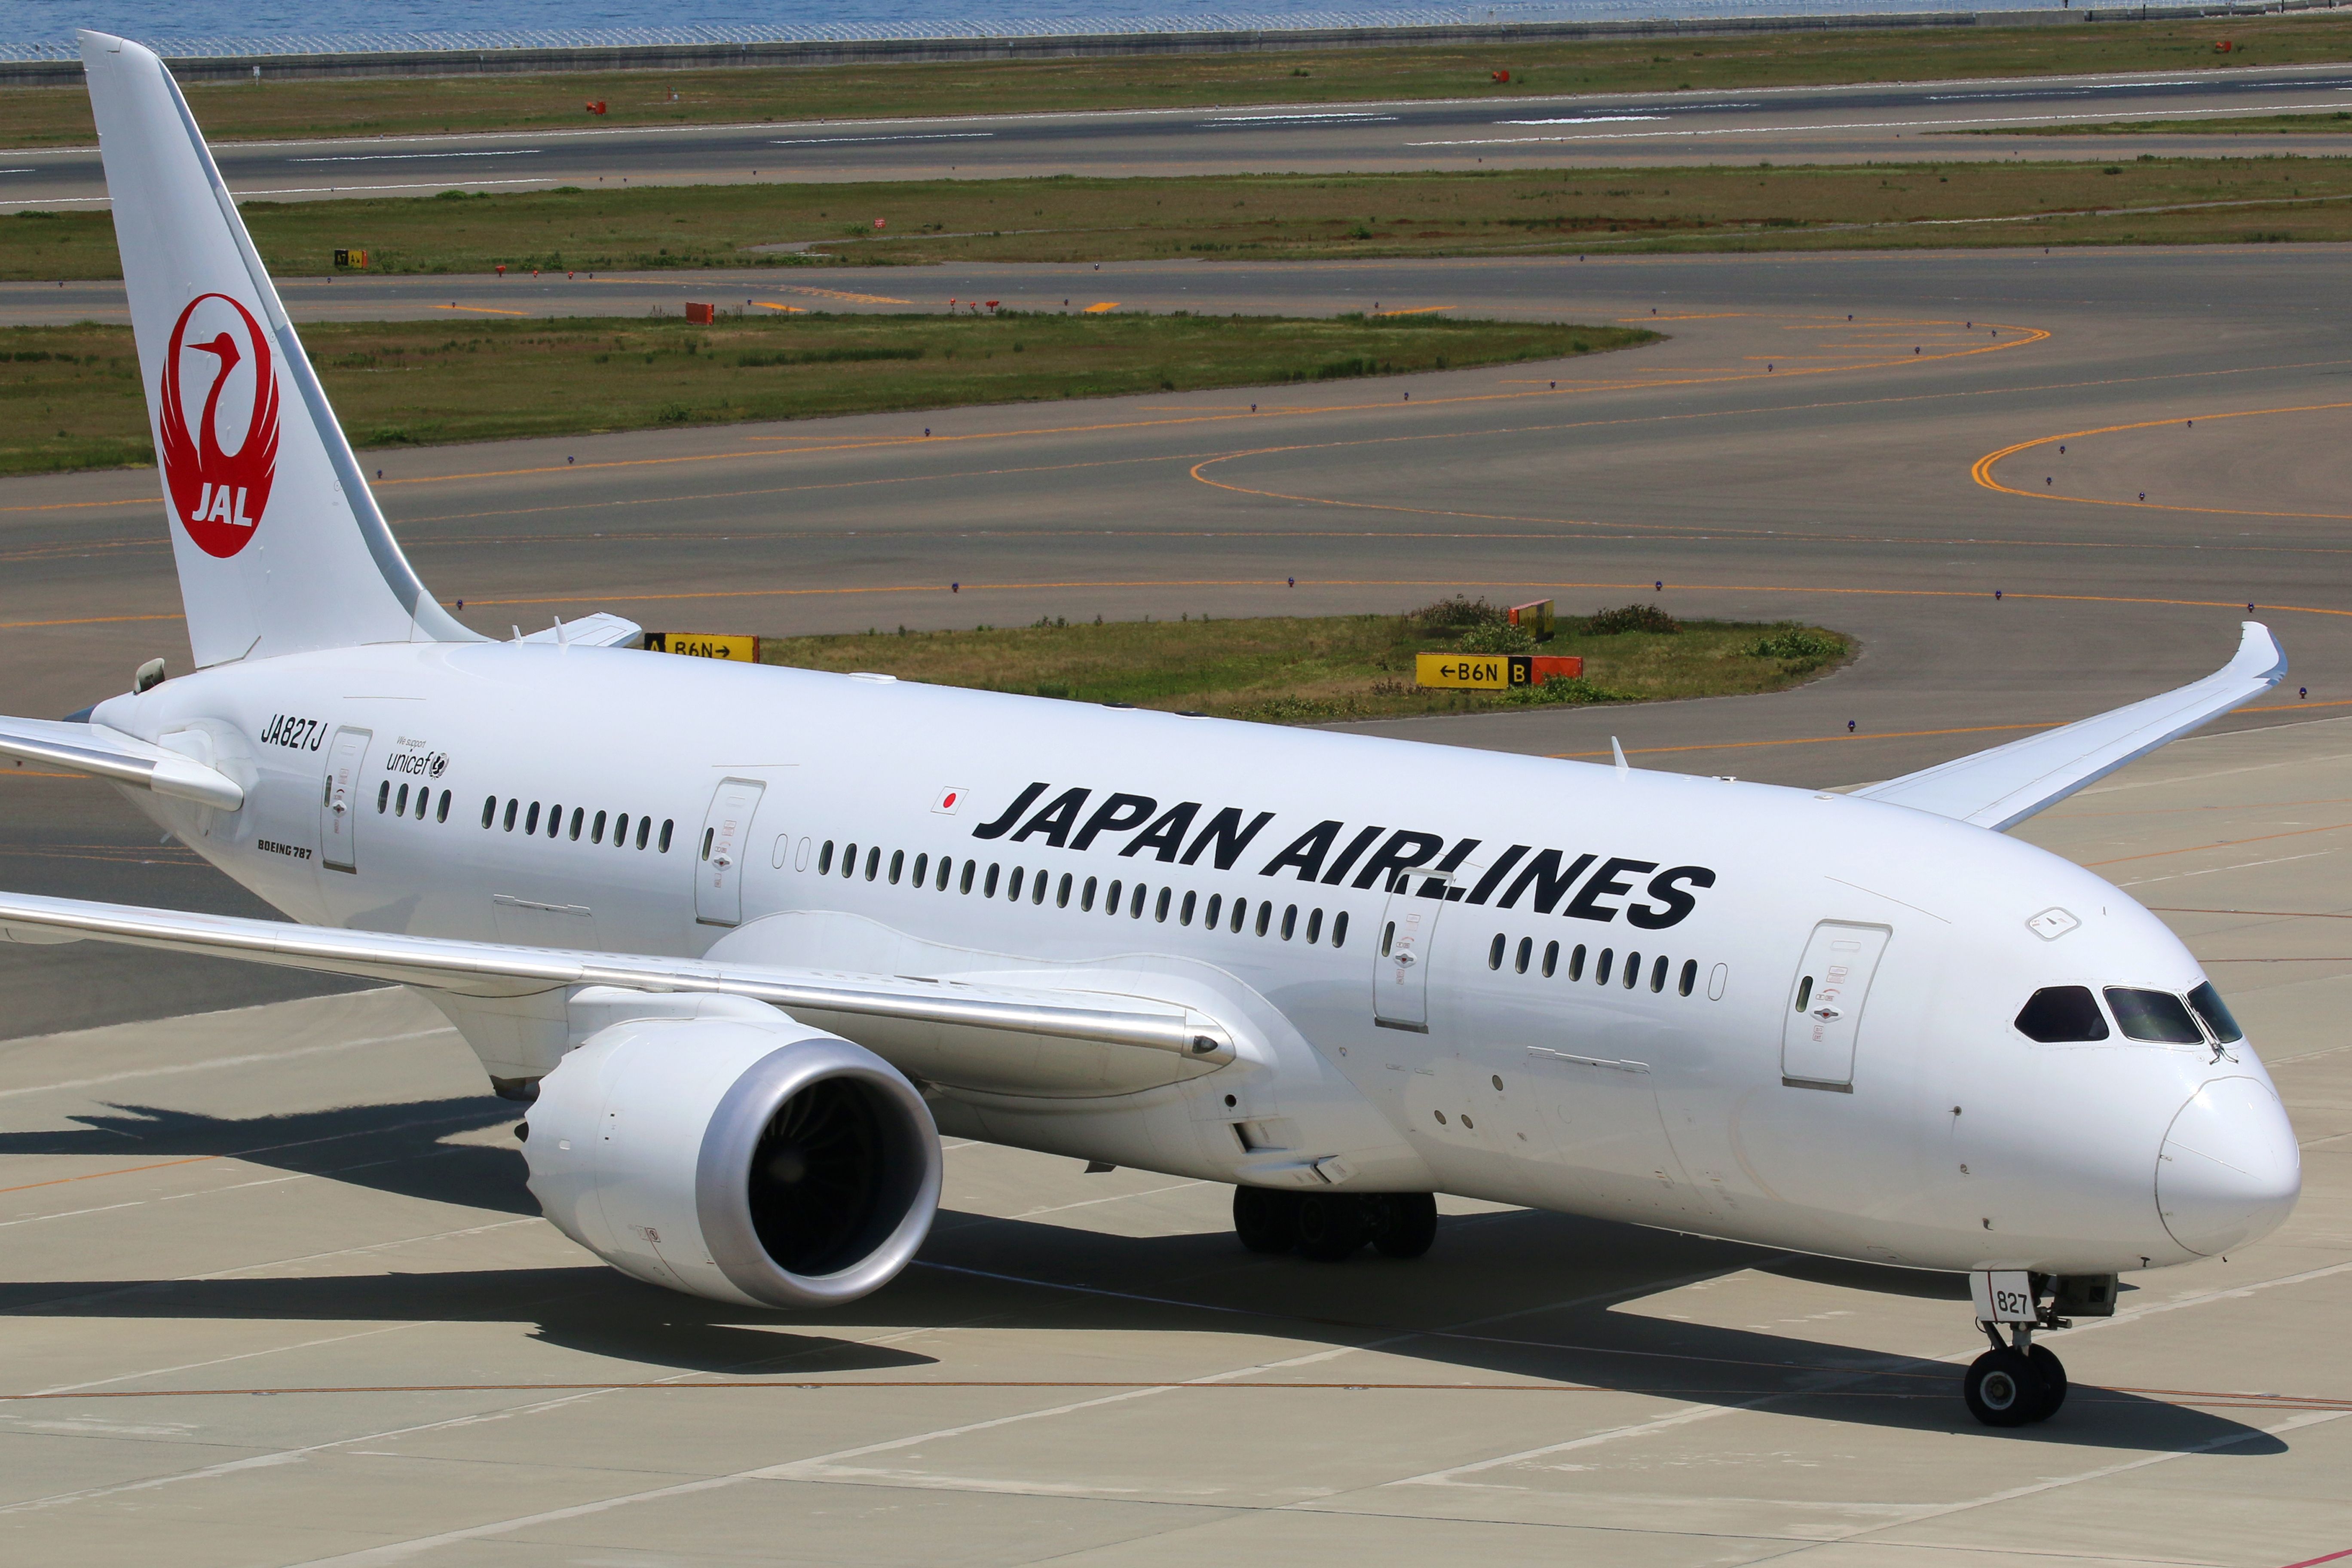 Japan Airlines Boeing 787-8 on the ground at an airprot shutterstock_218661910